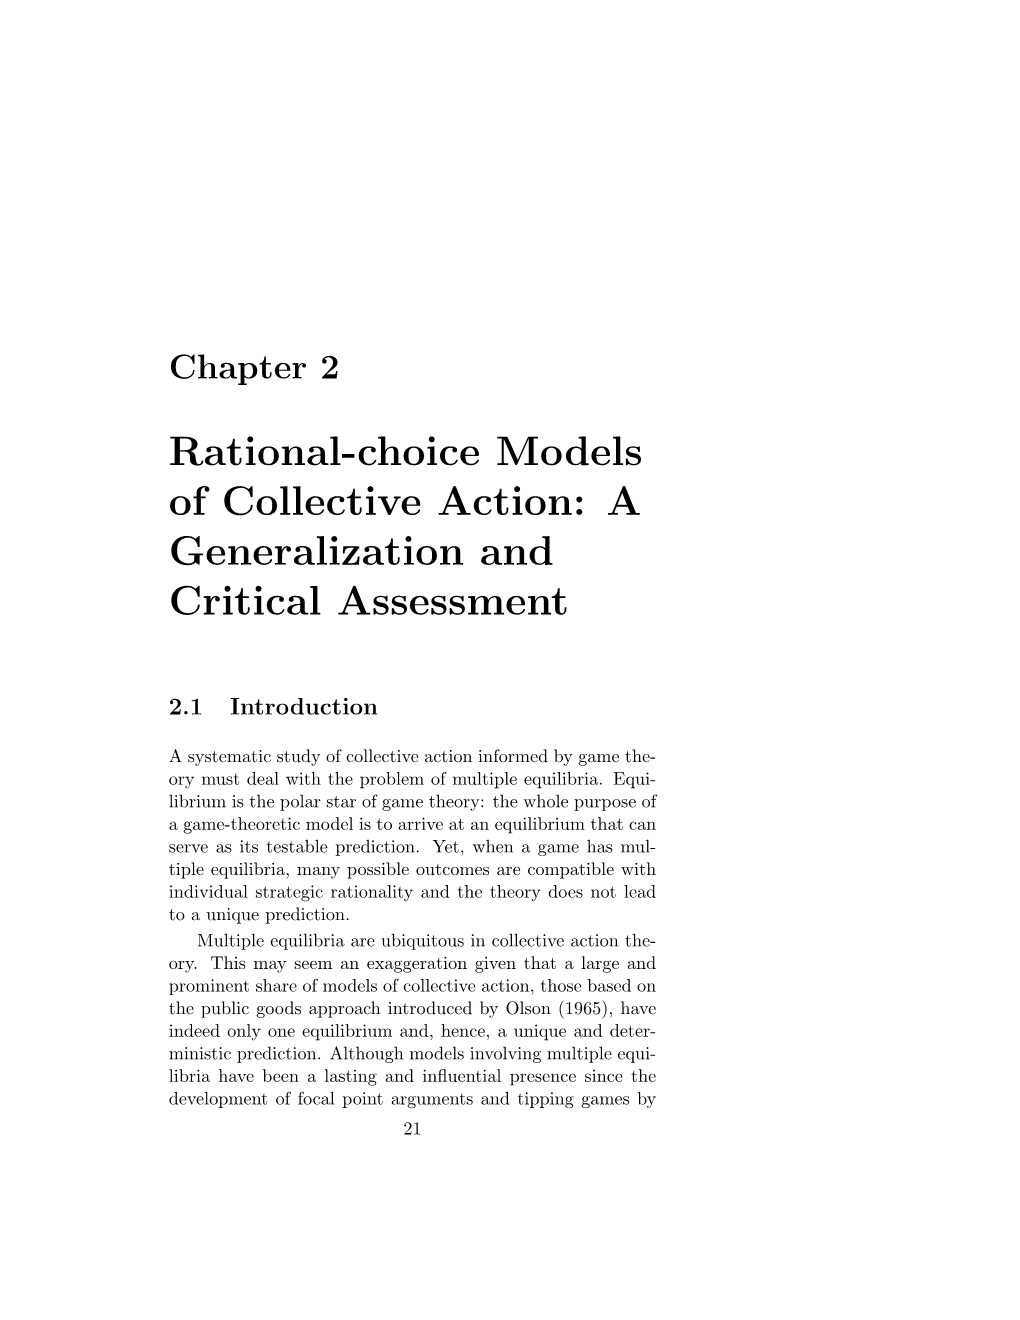 Rational-Choice Models of Collective Action: a Generalization and Critical Assessment